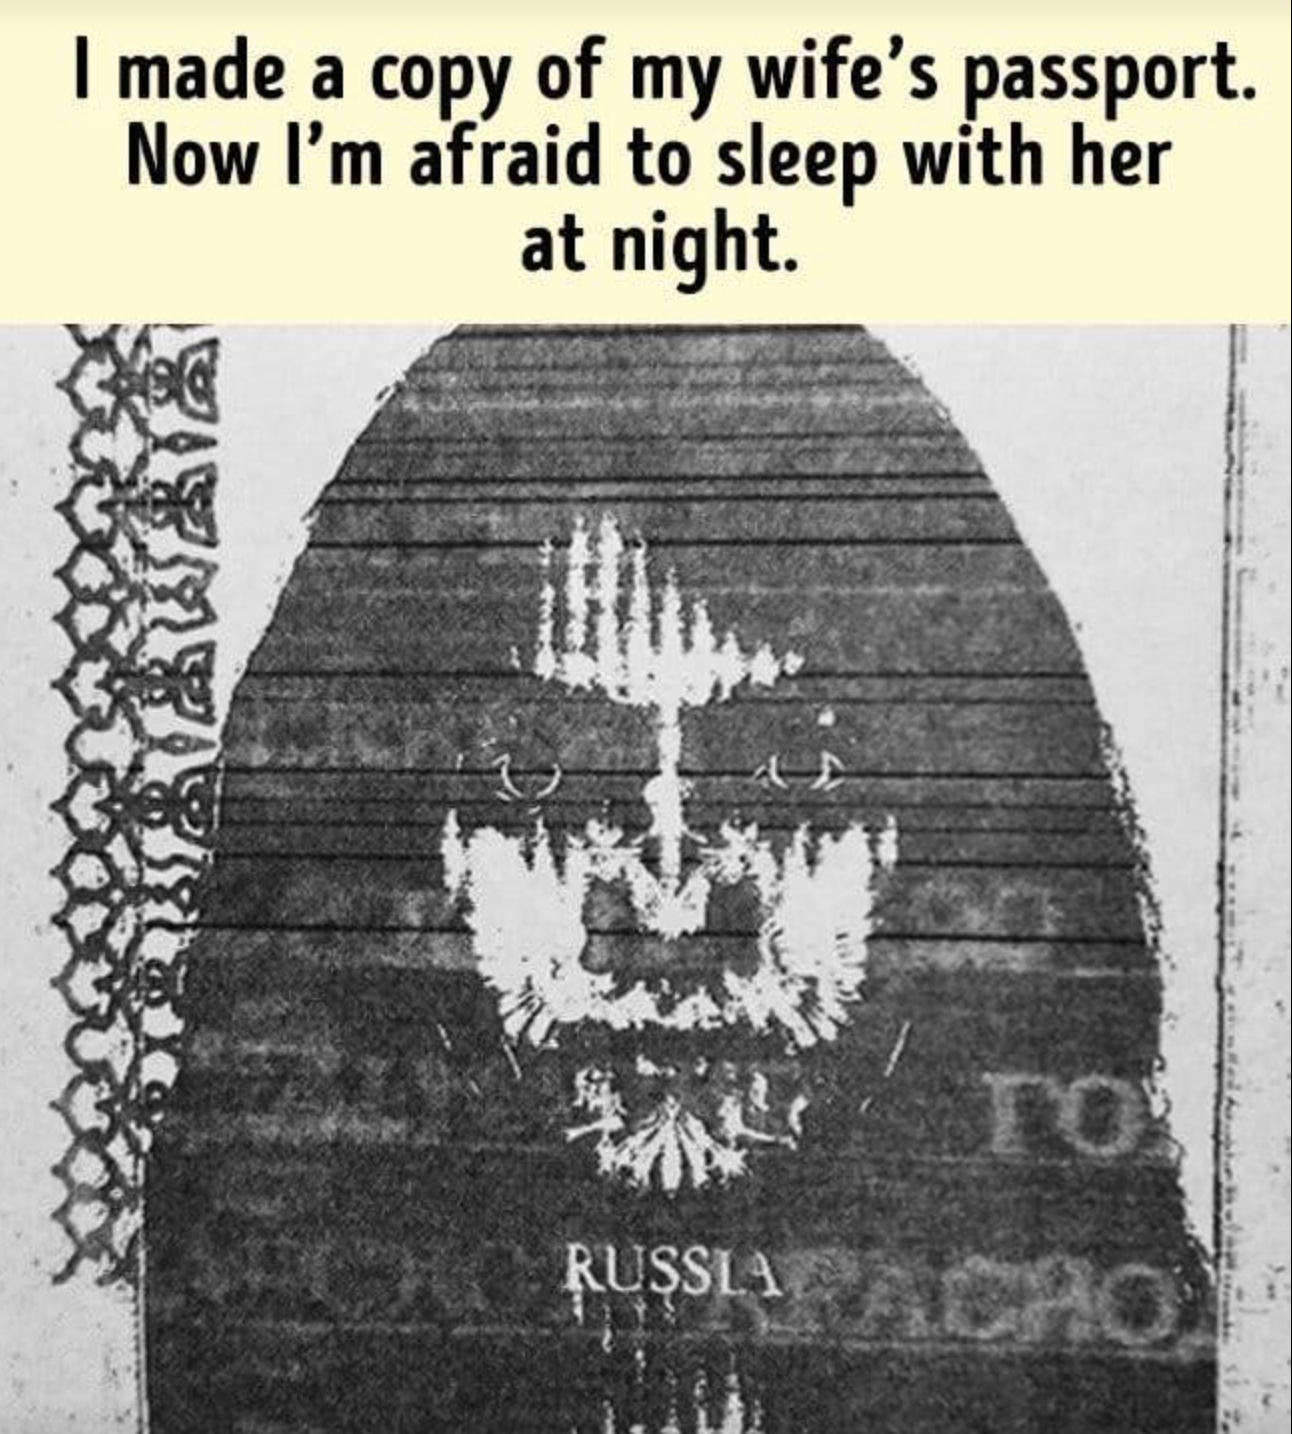 best wife humor - I made a copy of my wife's passport. Now I'm afraid to sleep with her at night. s' To Russia. Acao